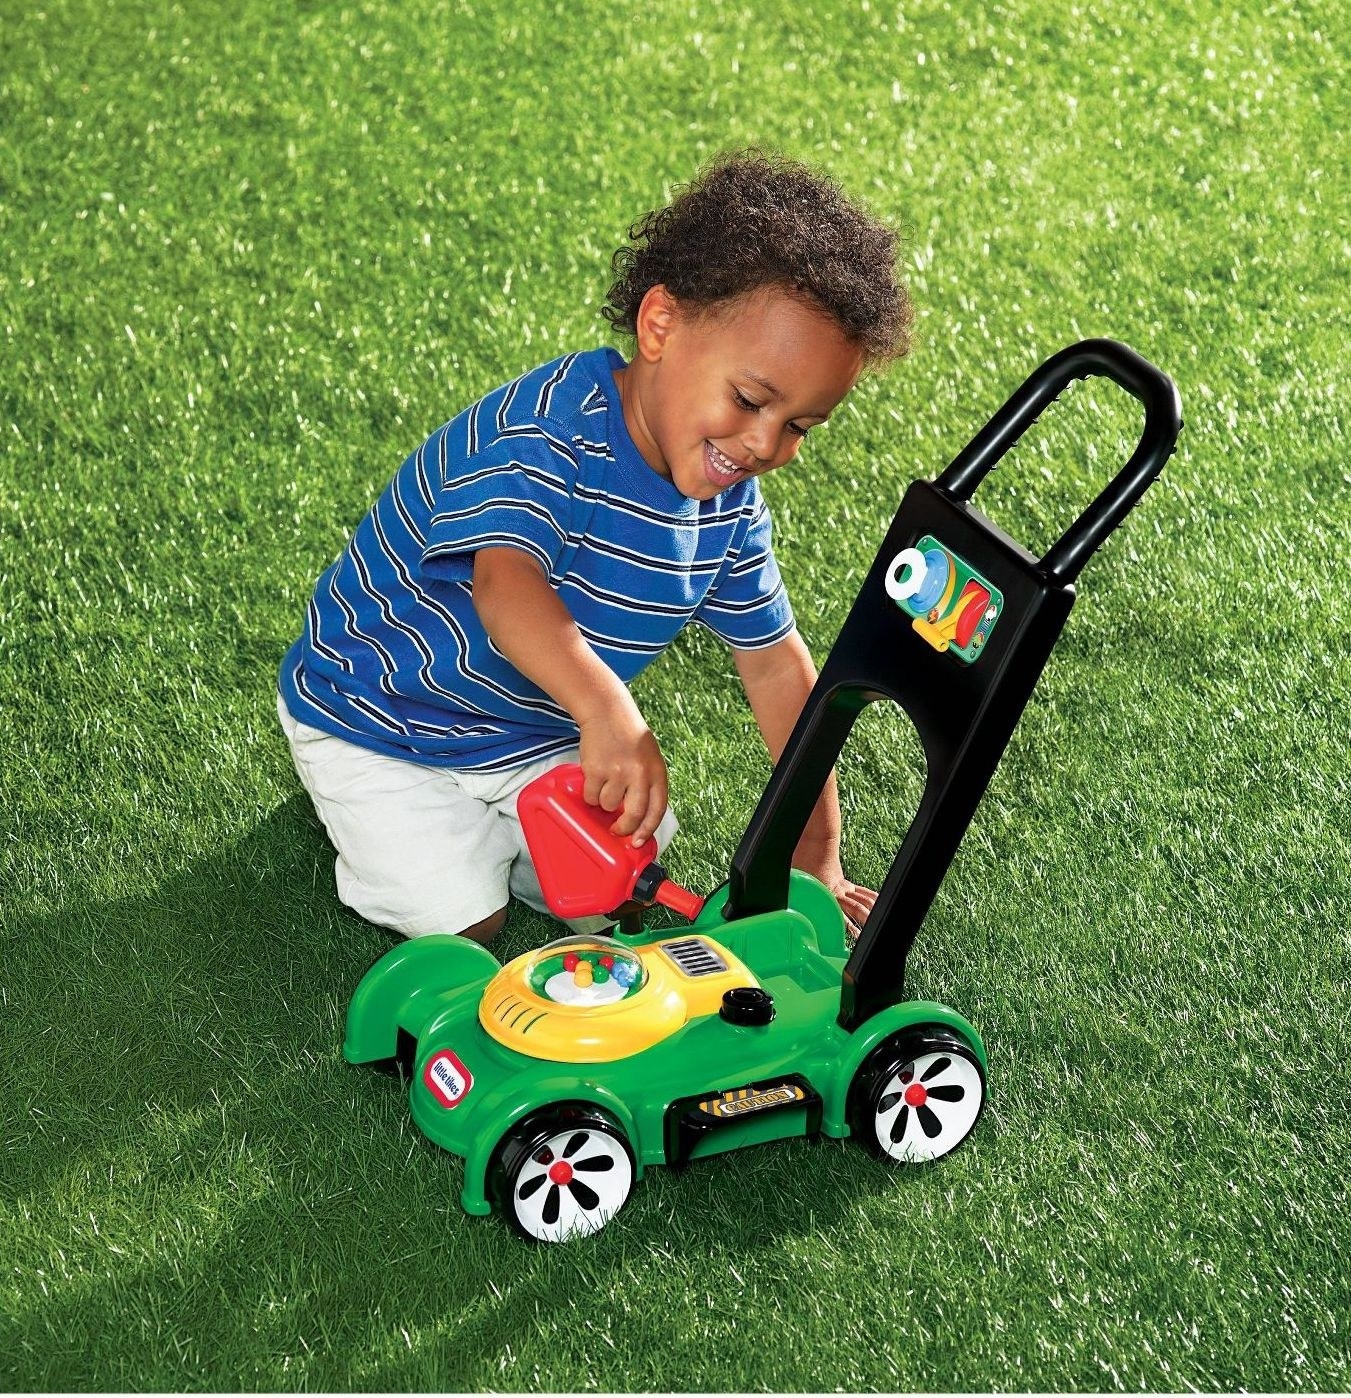 The toy lawnmower